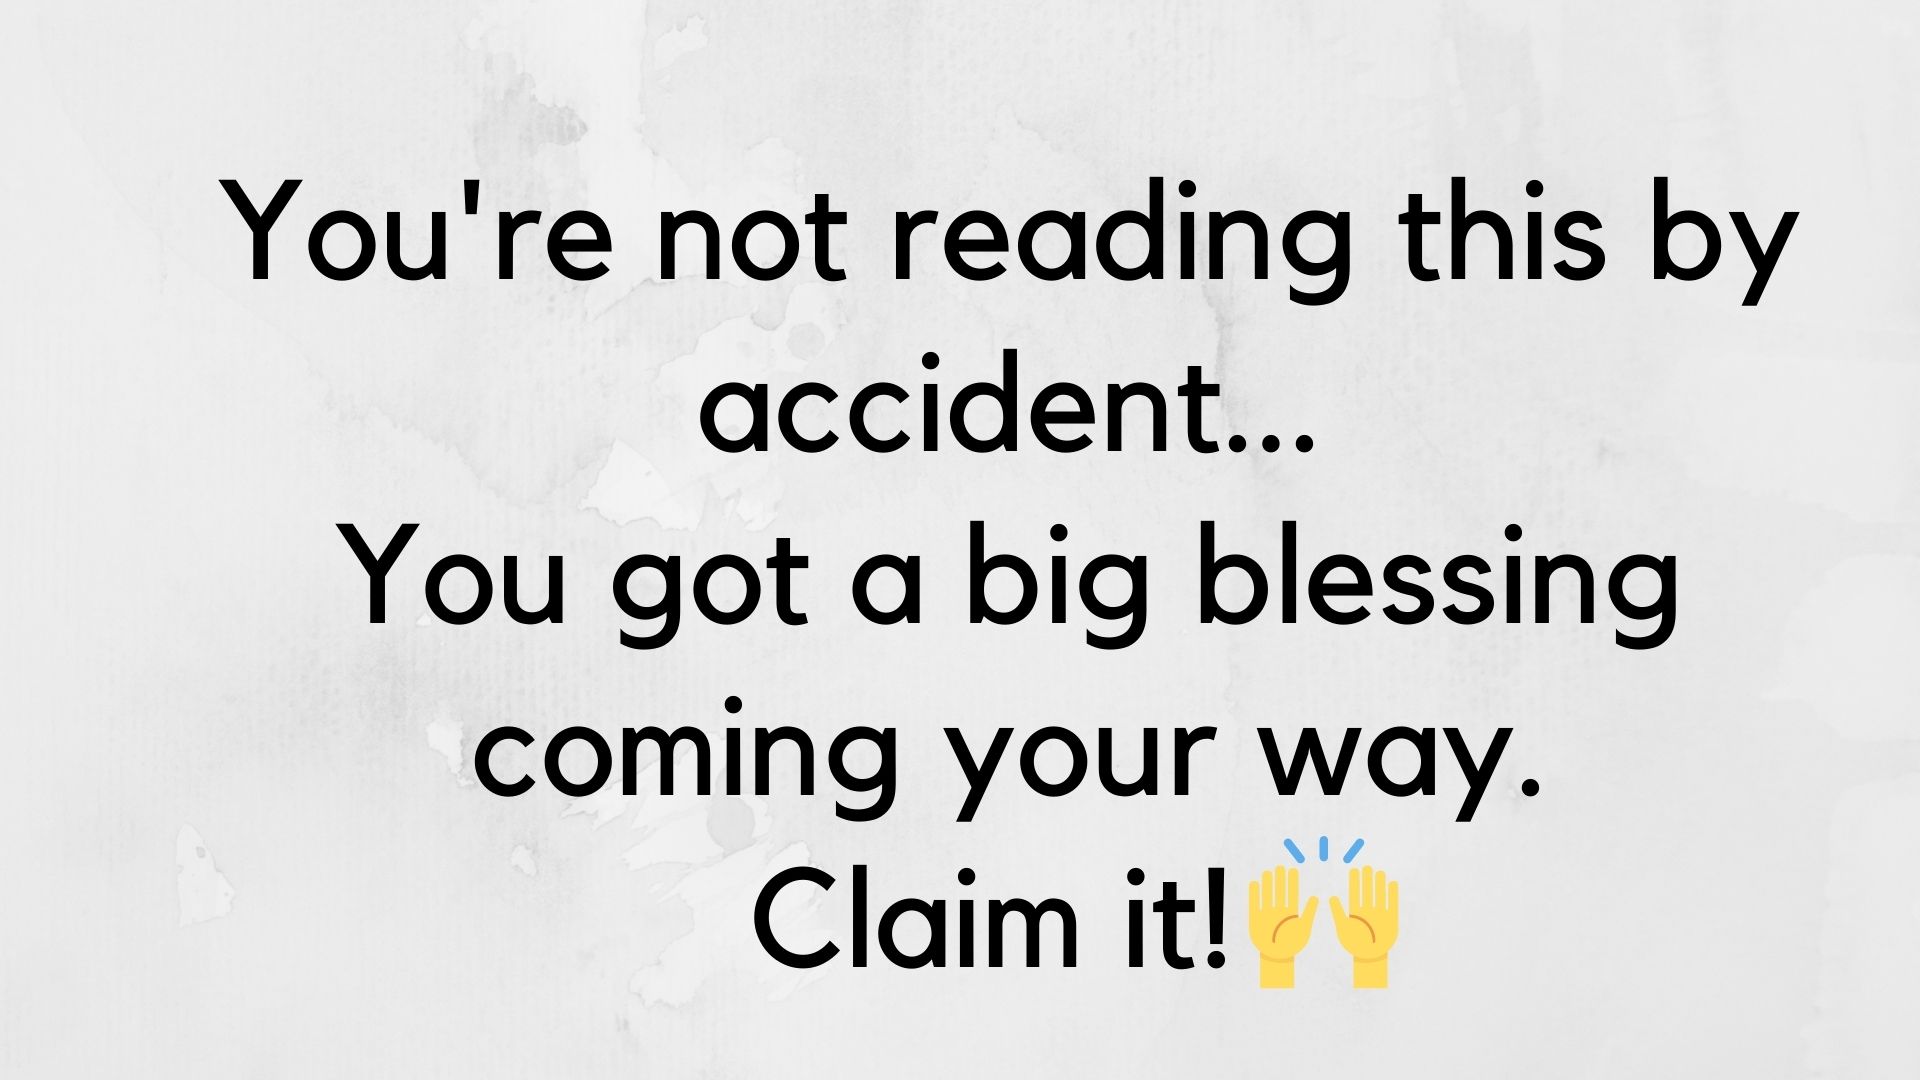 A Big Blessing Coming Your Way